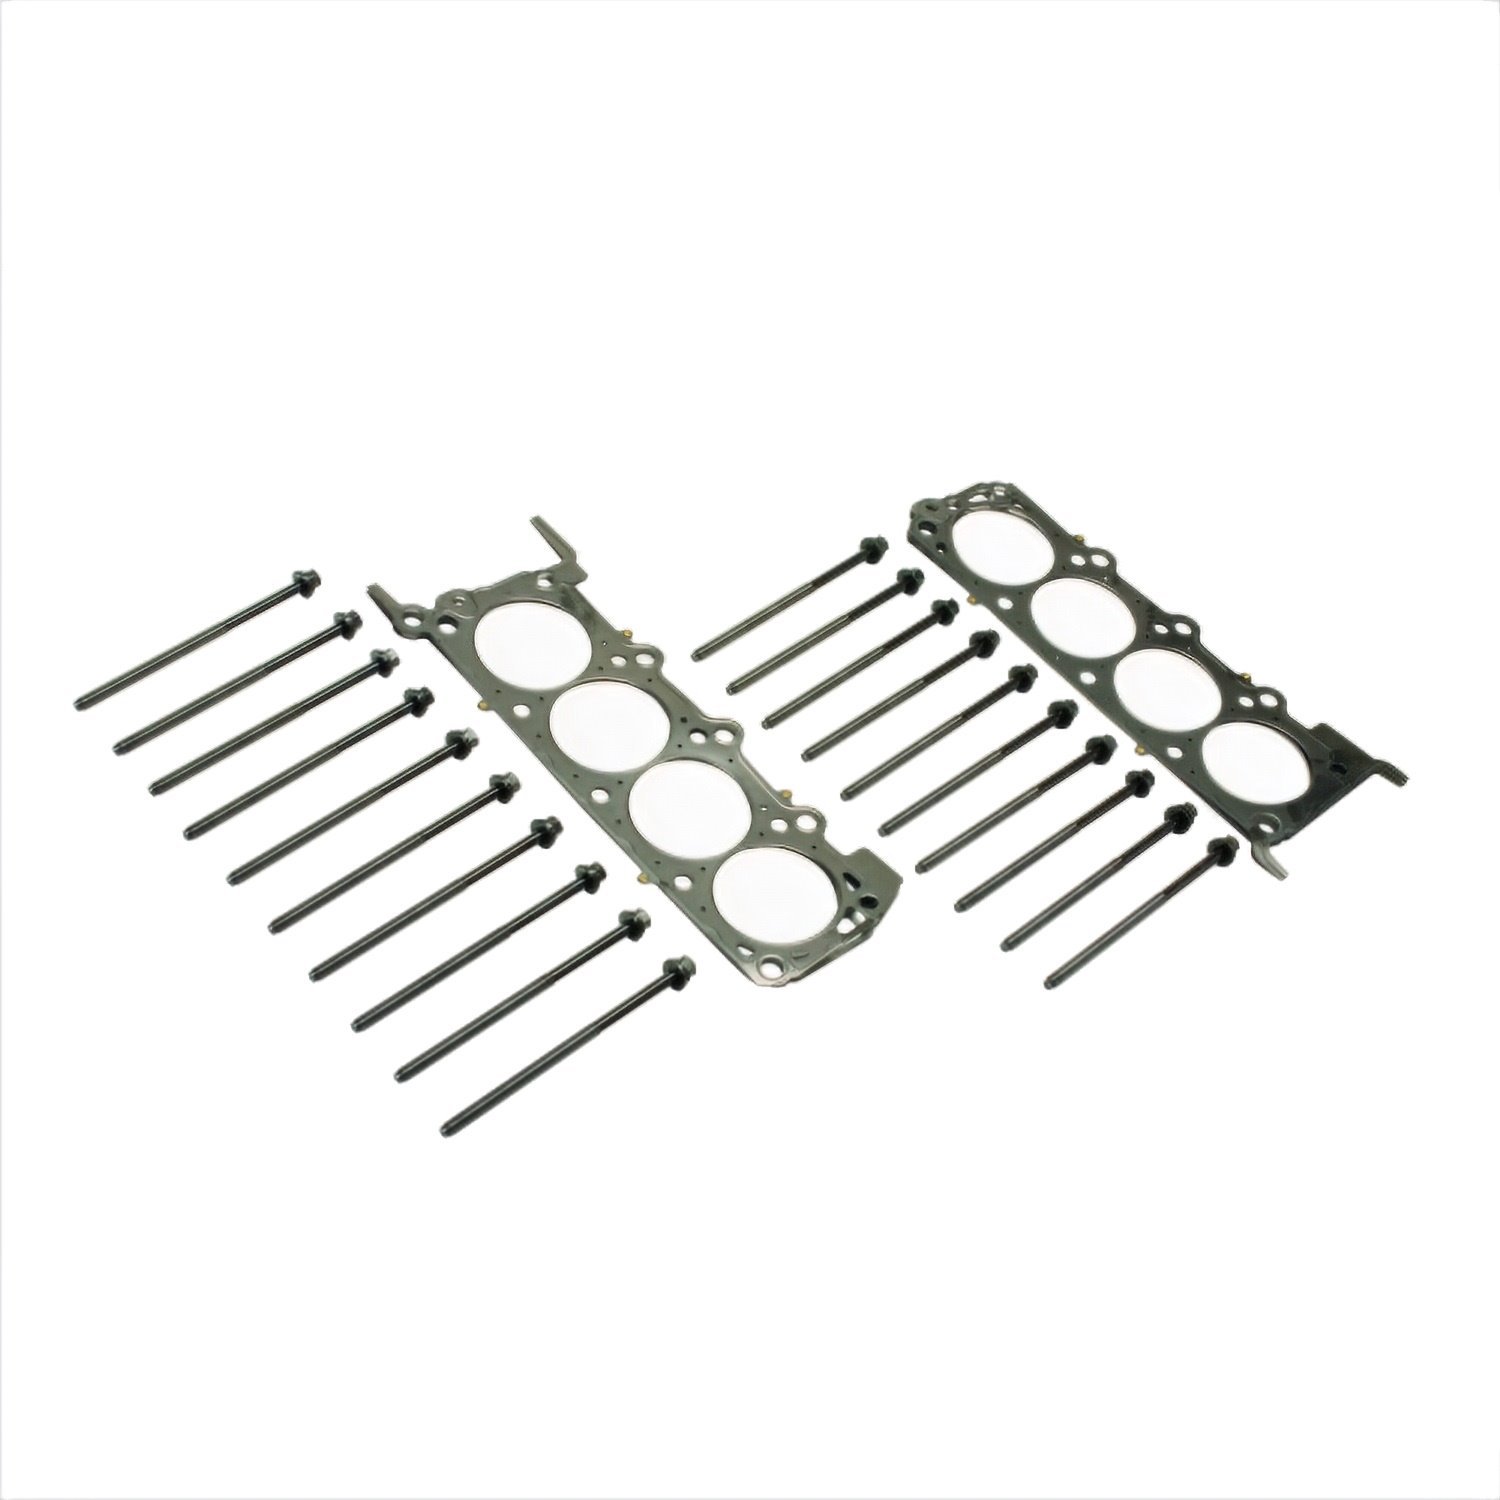 Cylinder Head Changing Kit Fits 5.0L modular engine with 3V heads